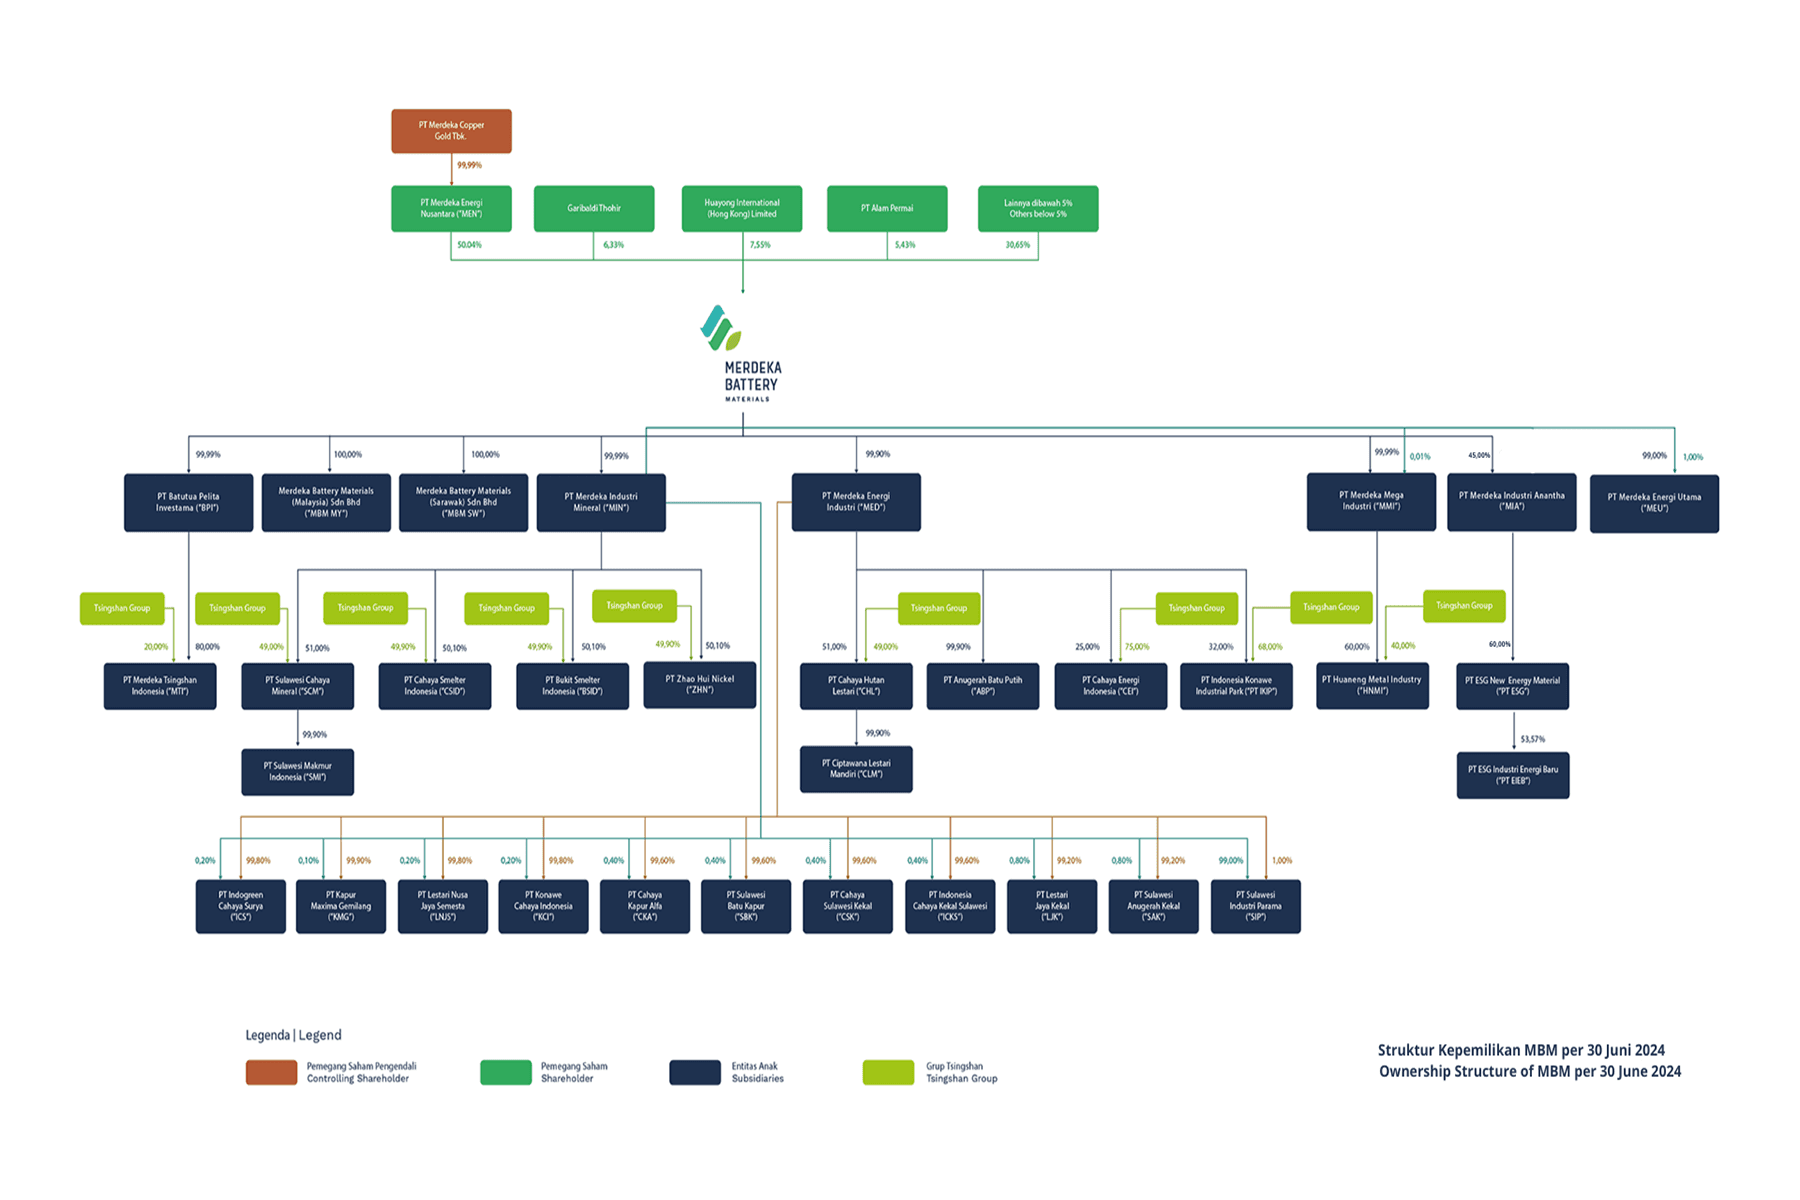 Ownership Structure